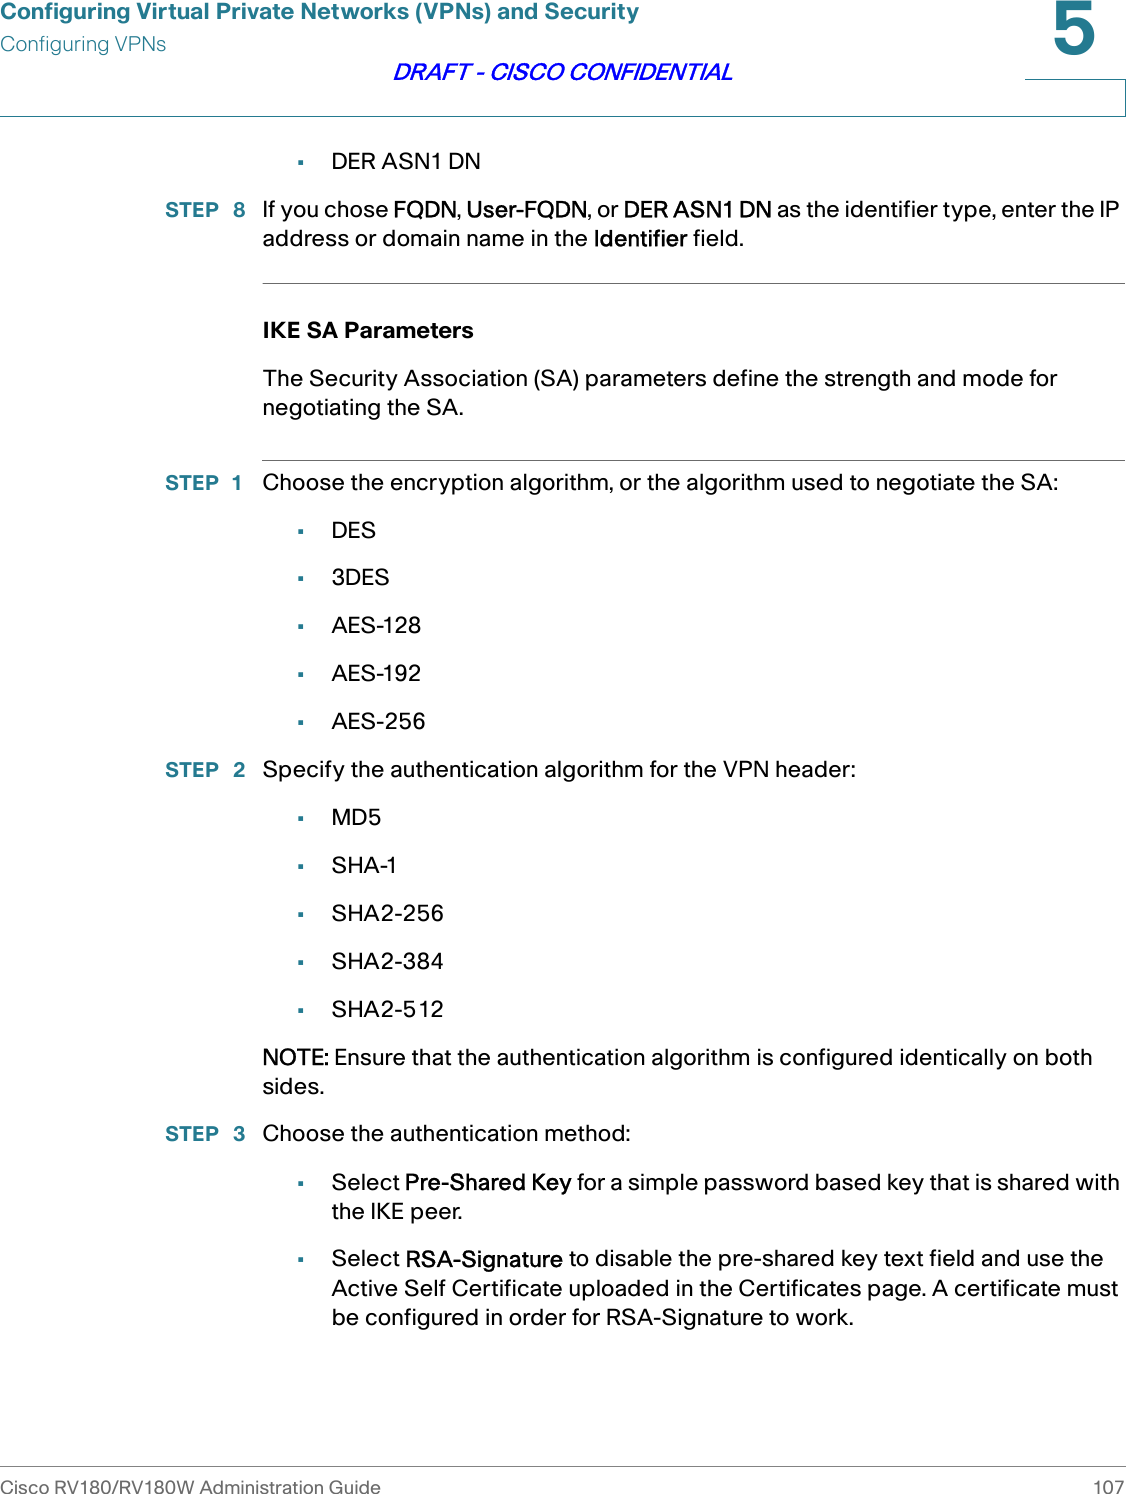 Configuring Virtual Private Networks (VPNs) and SecurityConfiguring VPNsCisco RV180/RV180W Administration Guide 1075DRAFT - CISCO CONFIDENTIAL•DER ASN1 DNSTEP  8 If you chose FQDN, User-FQDN, or DER ASN1 DN as the identifier type, enter the IP address or domain name in the Identifier field. IKE SA ParametersThe Security Association (SA) parameters define the strength and mode for negotiating the SA. STEP 1 Choose the encryption algorithm, or the algorithm used to negotiate the SA:•DES•3DES•AES-128•AES-192•AES-256STEP  2 Specify the authentication algorithm for the VPN header: •MD5•SHA-1•SHA2-256•SHA2-384•SHA2-512NOTE: Ensure that the authentication algorithm is configured identically on both sides.STEP  3 Choose the authentication method: •Select Pre-Shared Key for a simple password based key that is shared with the IKE peer.•Select RSA-Signature to disable the pre-shared key text field and use the Active Self Certificate uploaded in the Certificates page. A certificate must be configured in order for RSA-Signature to work. 